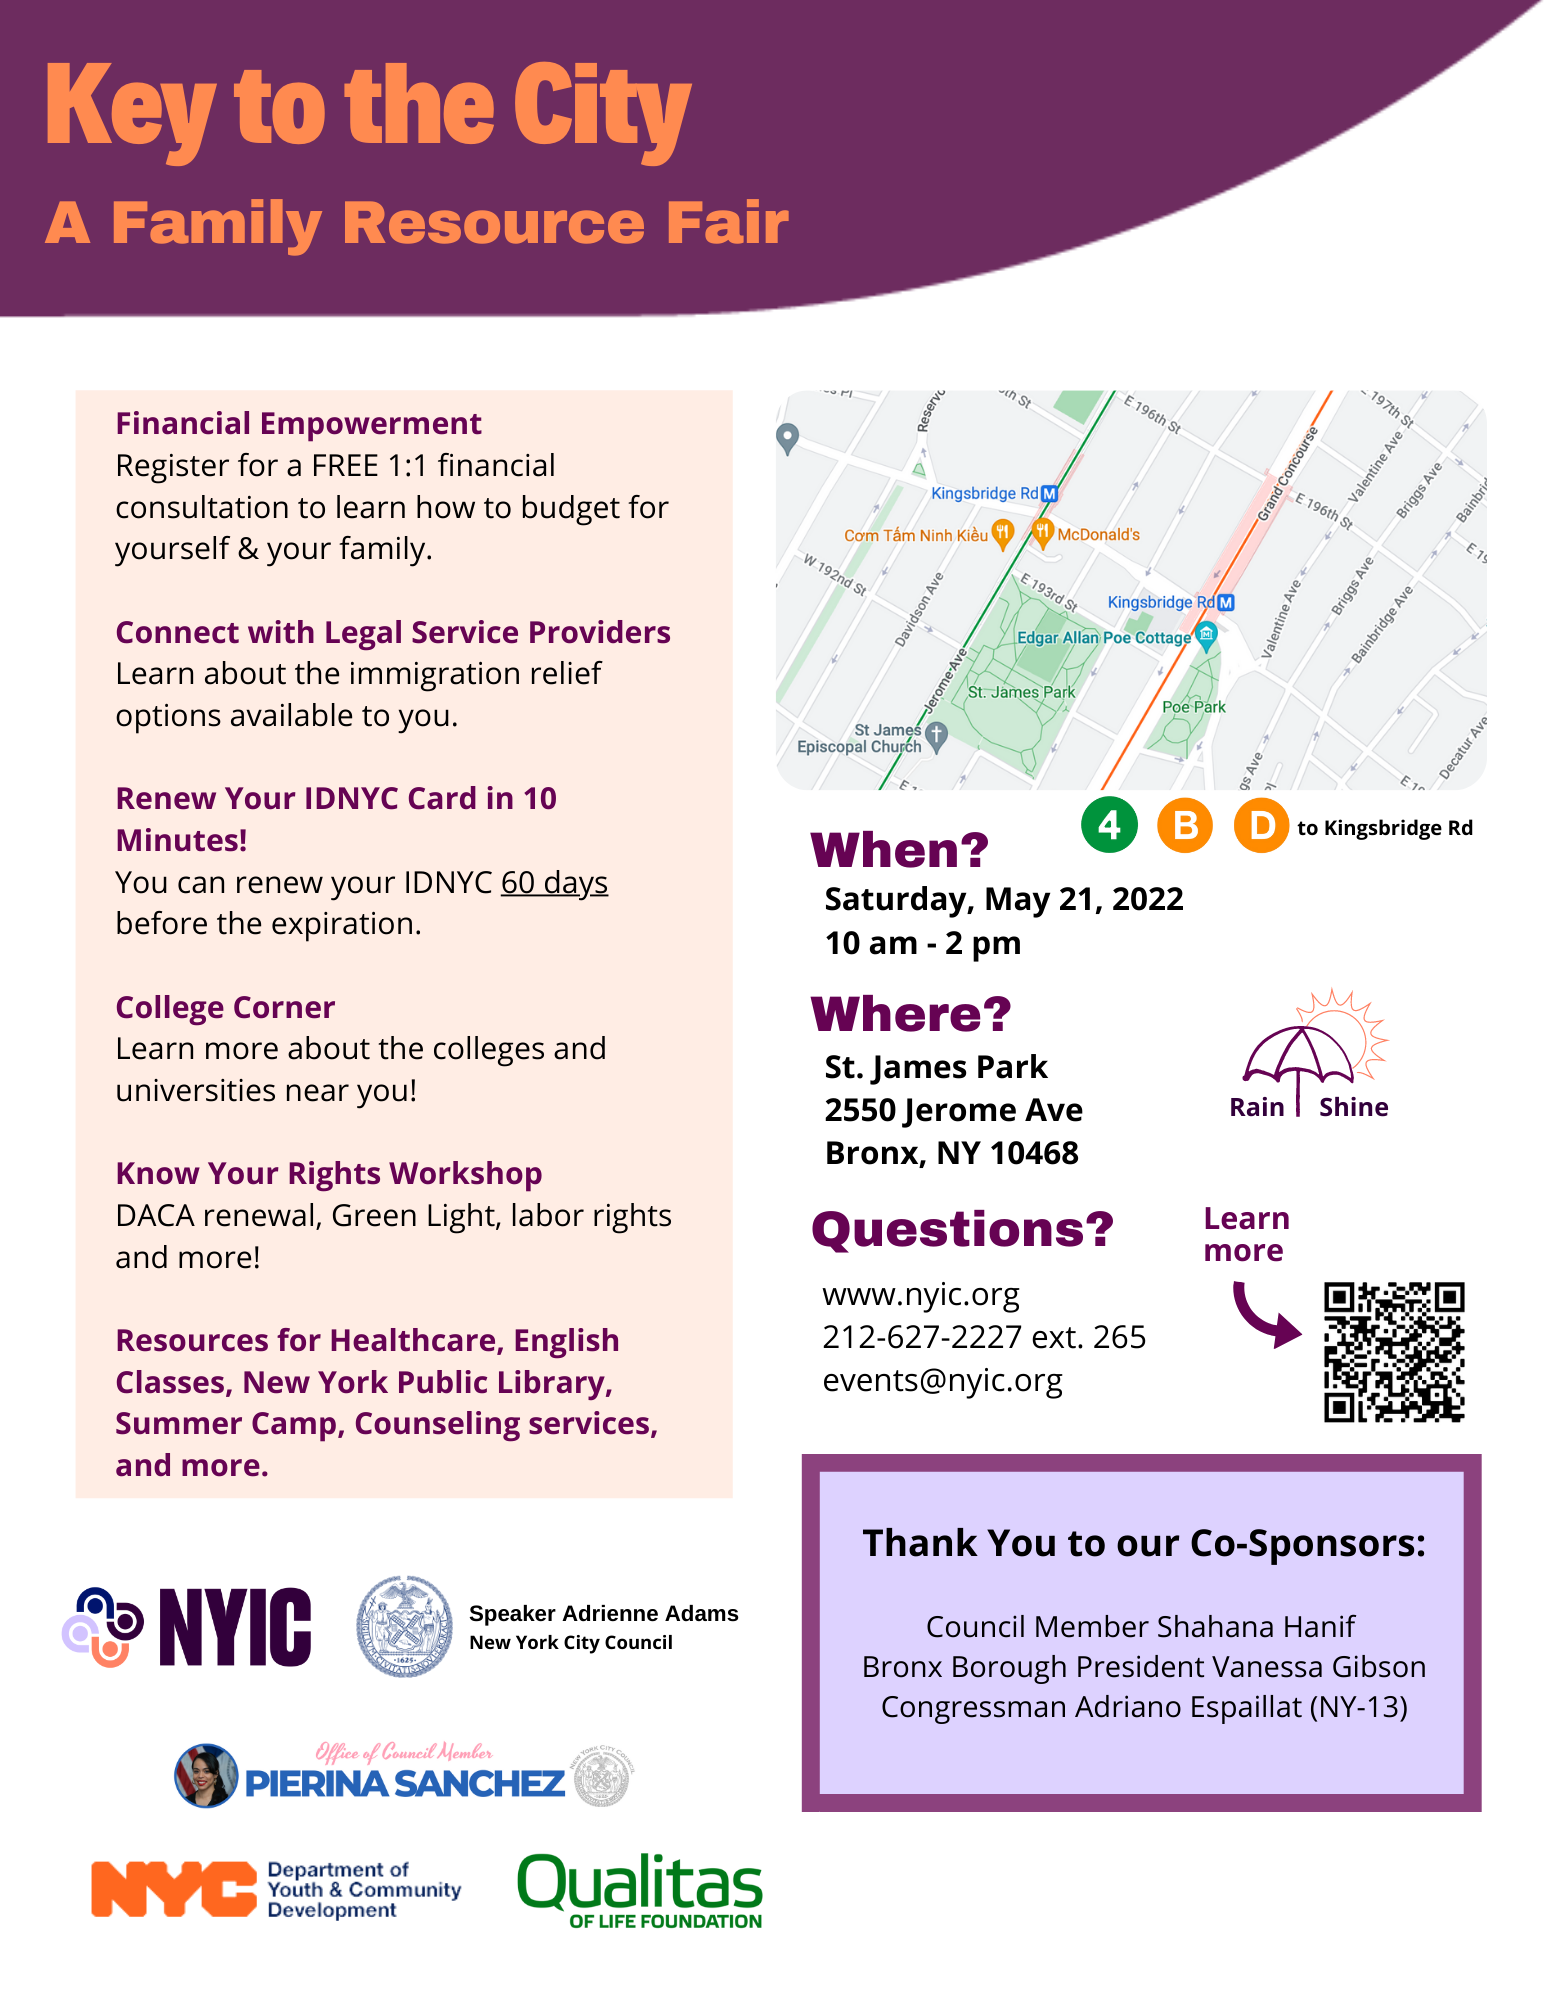 Key to the City: A Family Resource Fair @ St. James Park